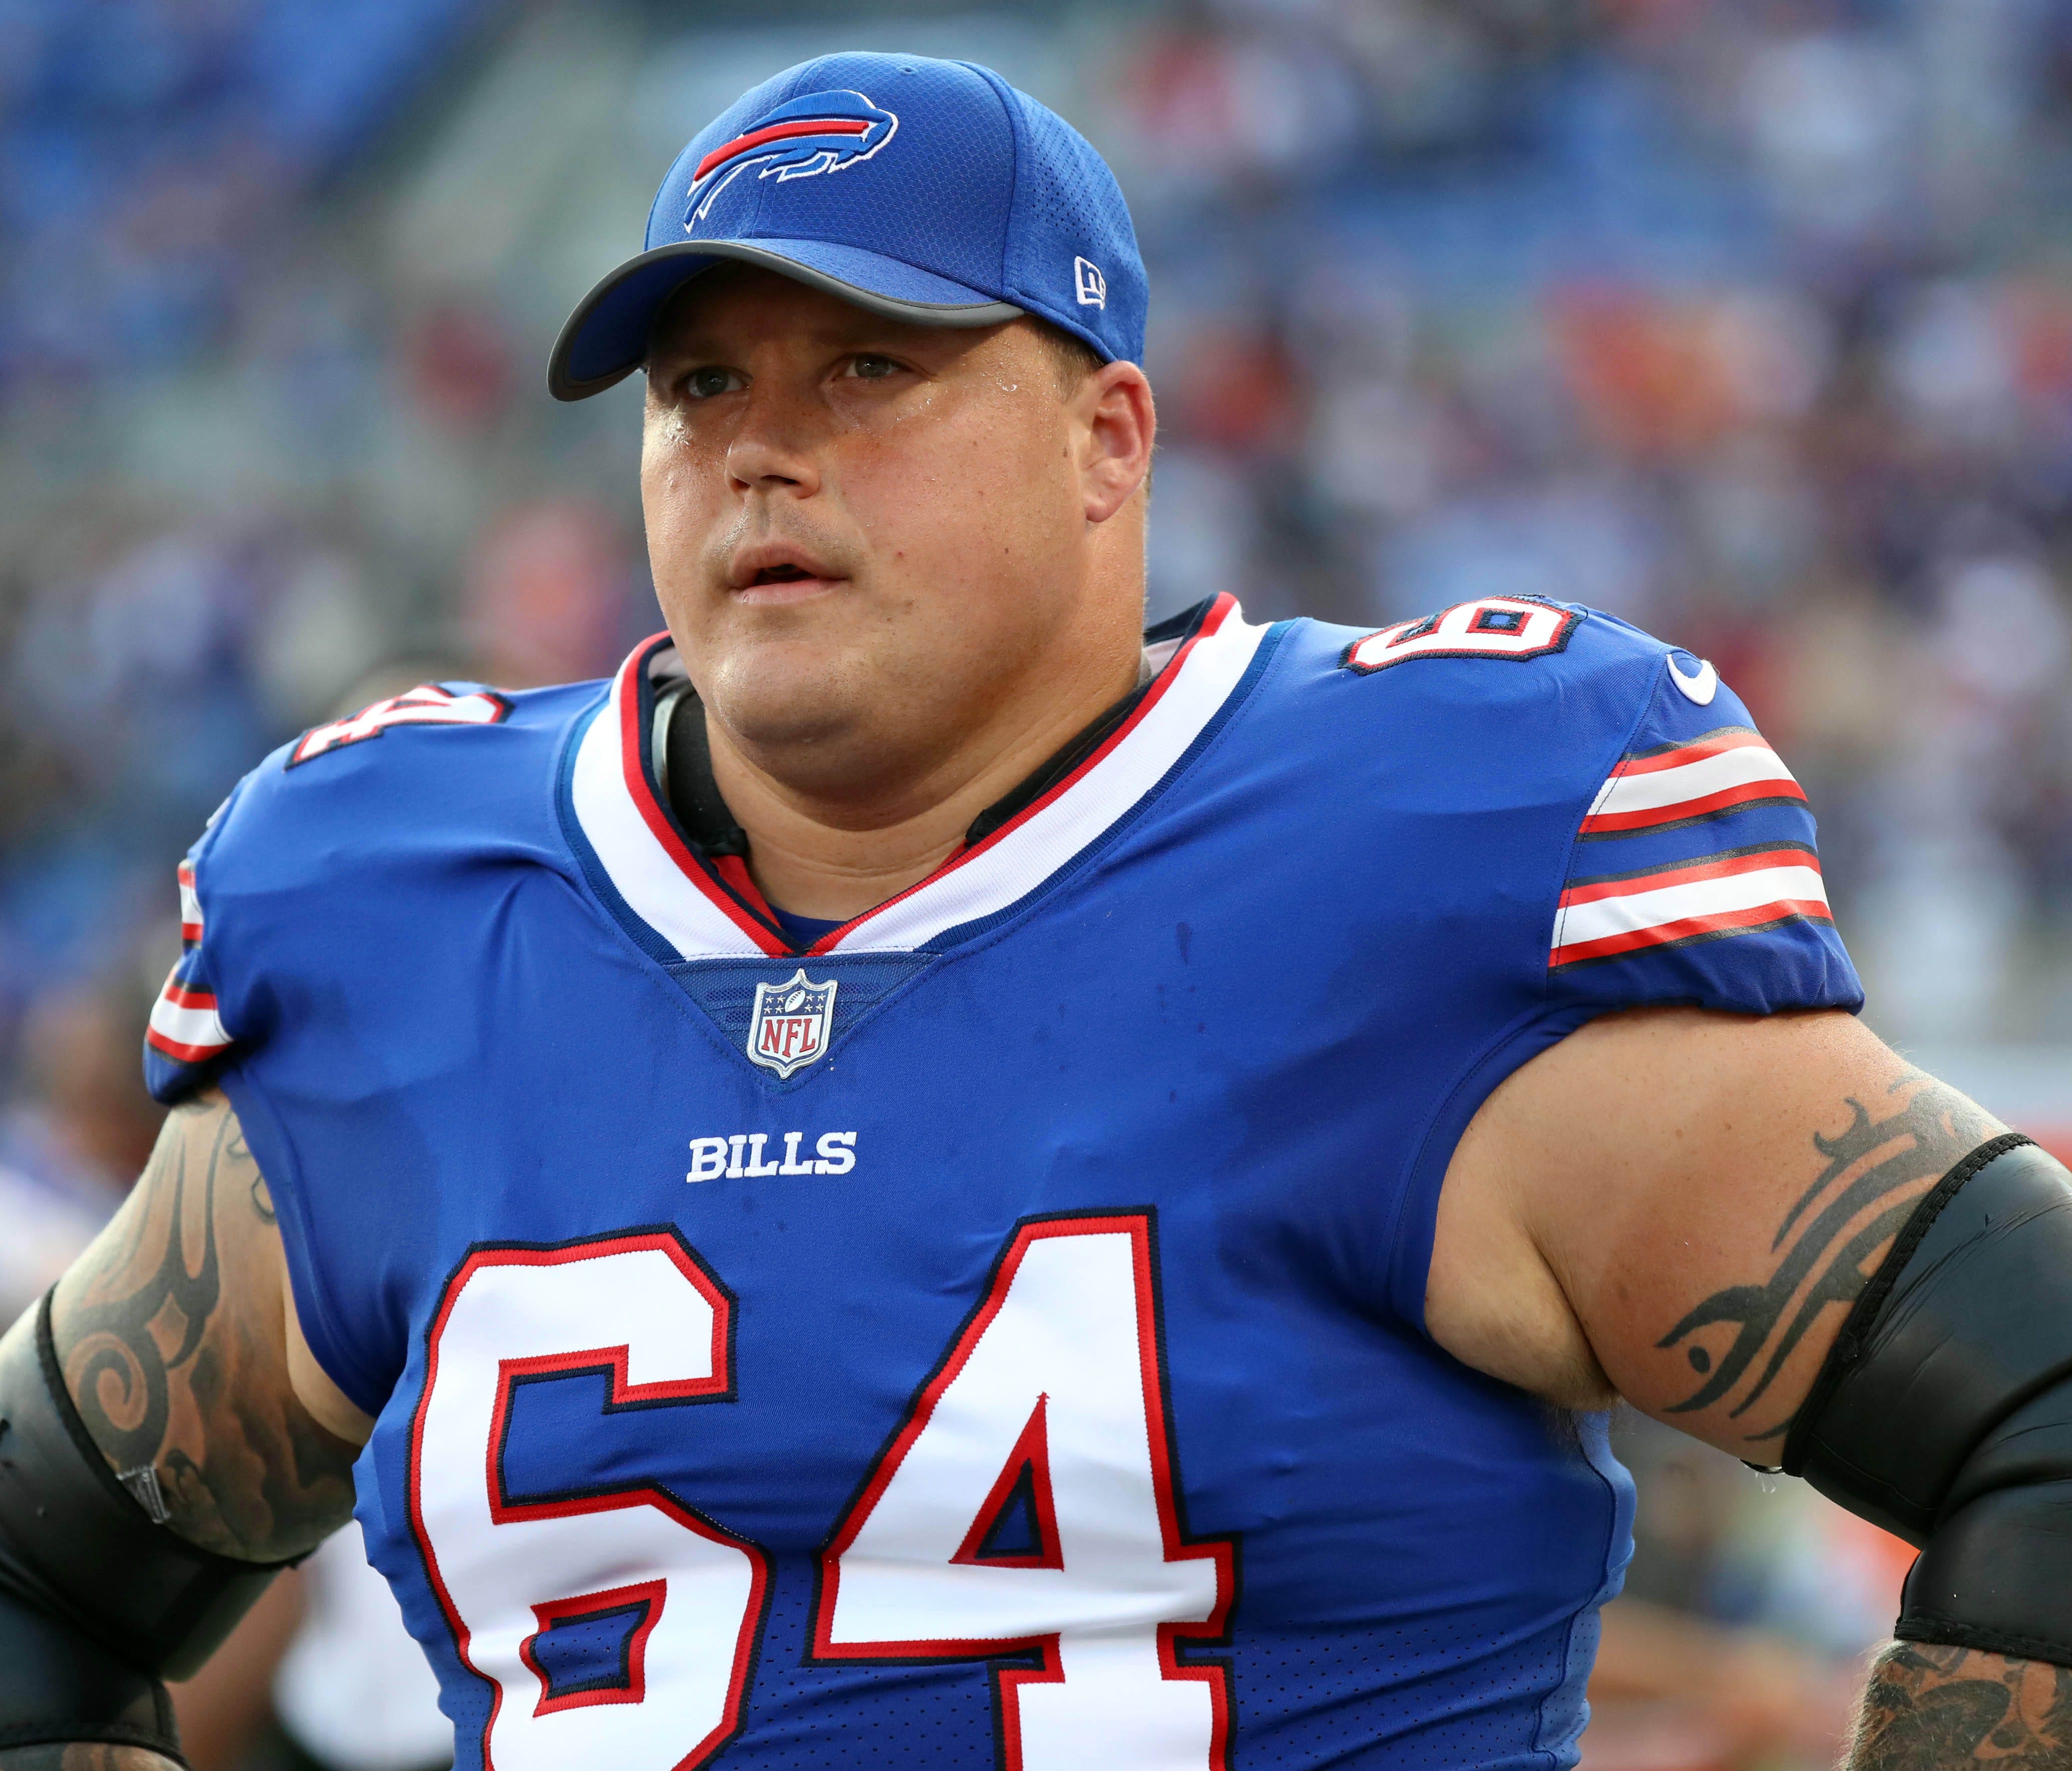 Buffalo Bills guard Richie Incognito (64) prior to the game against the Baltimore Ravens at M&T Bank Stadium.